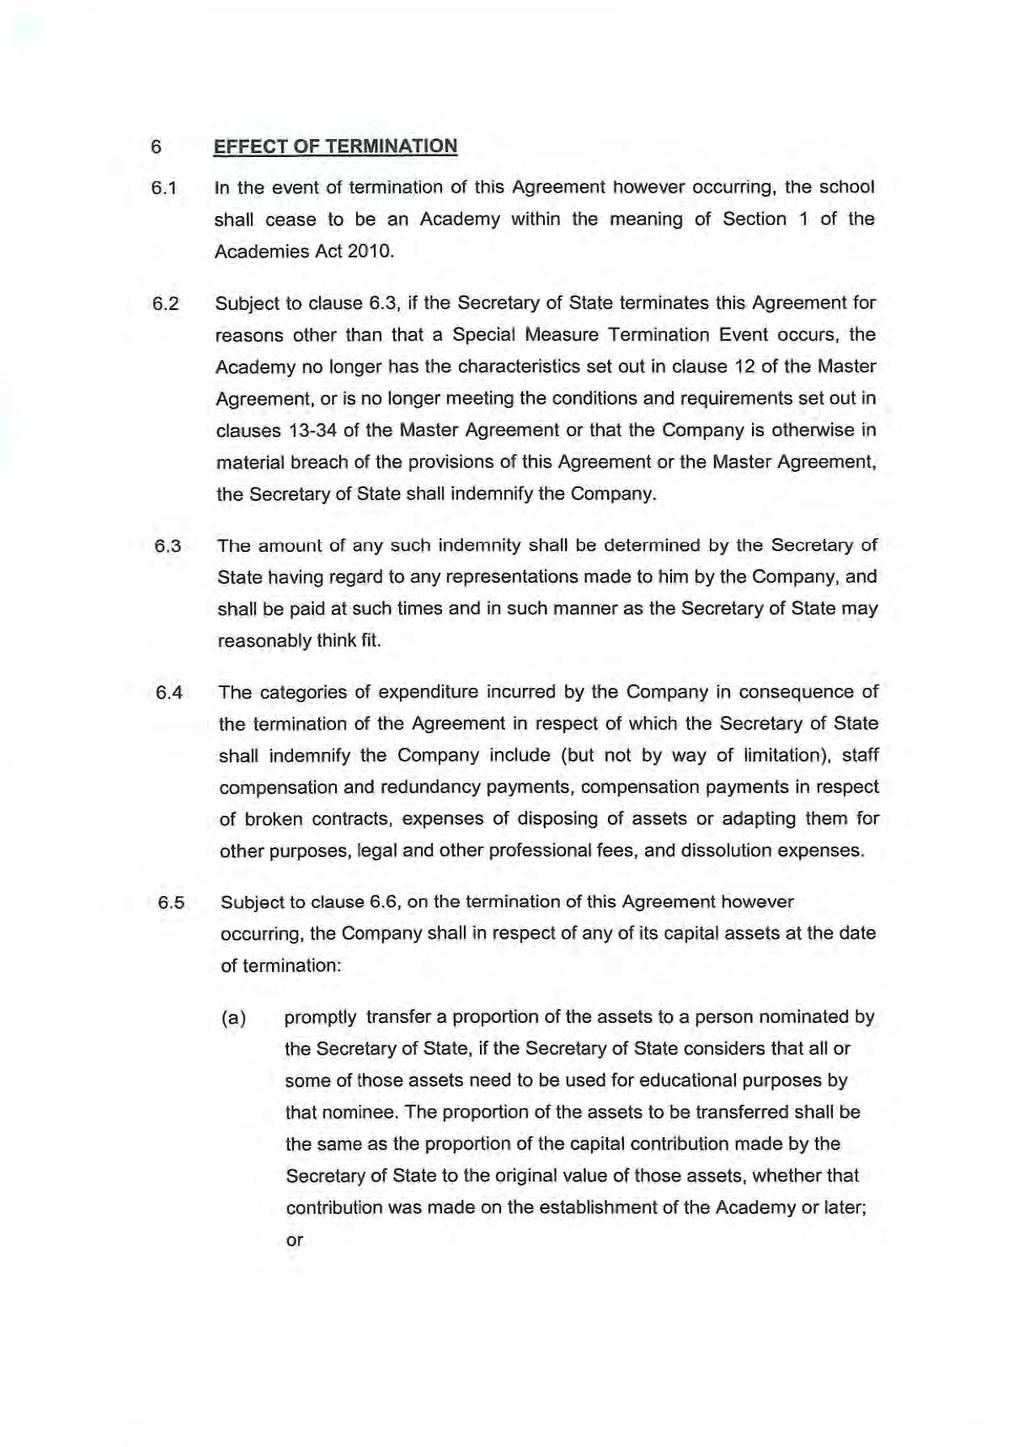 6 EFFECT OF TERMINATION 6.1 In the event of termination of this Agreement however occurring, the school shall cease to be an Academy within the meaning of Section 1 of the Academies Act 2010. 6.2 Subject to clause 6.